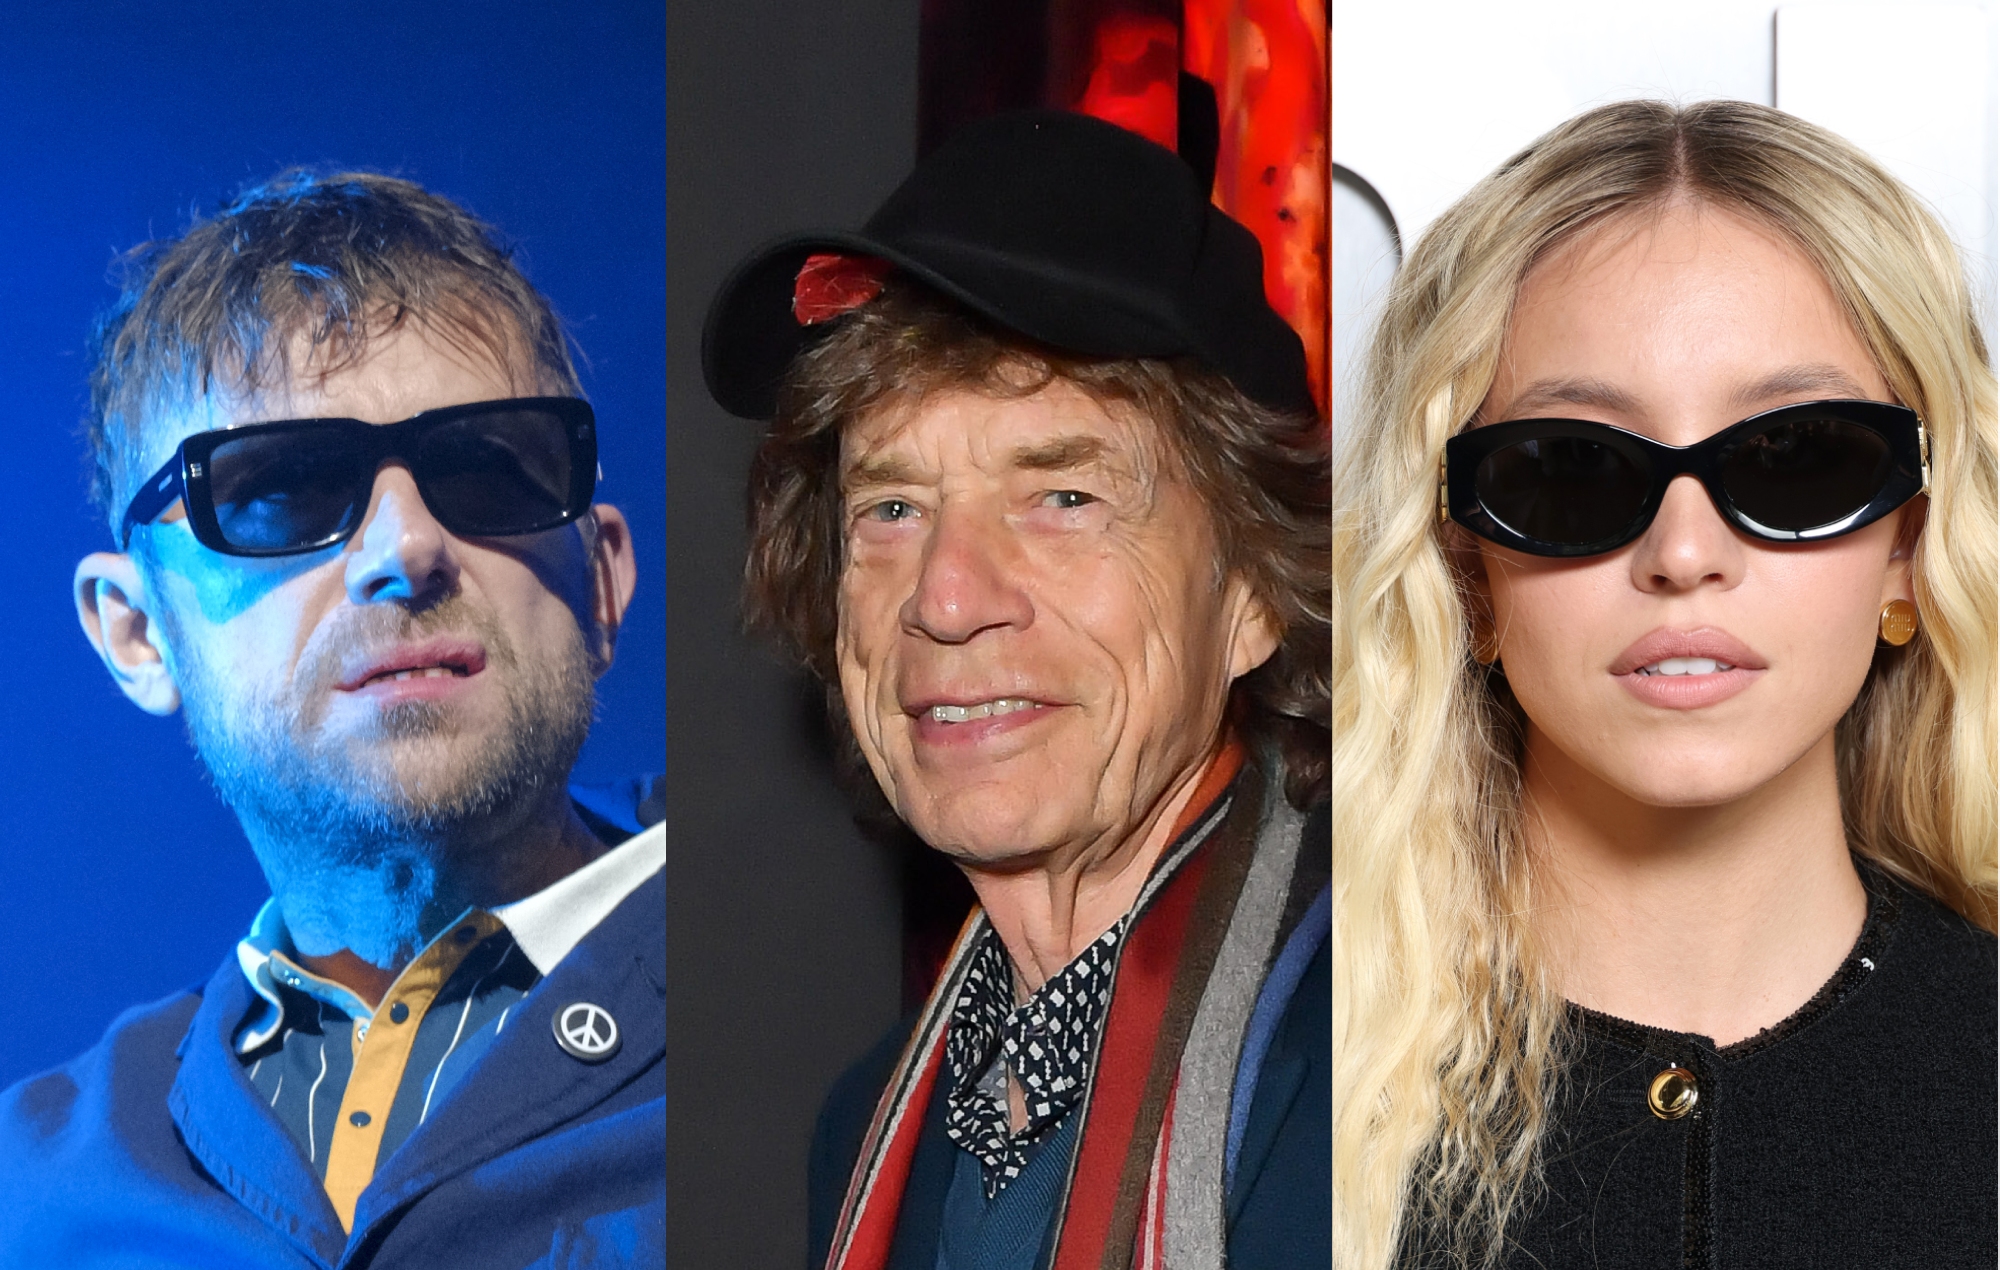 Damon Albarn “pissed off” with Rolling Stones for never “contributing” to Hackney and “objectifying” Sydney Sweeney